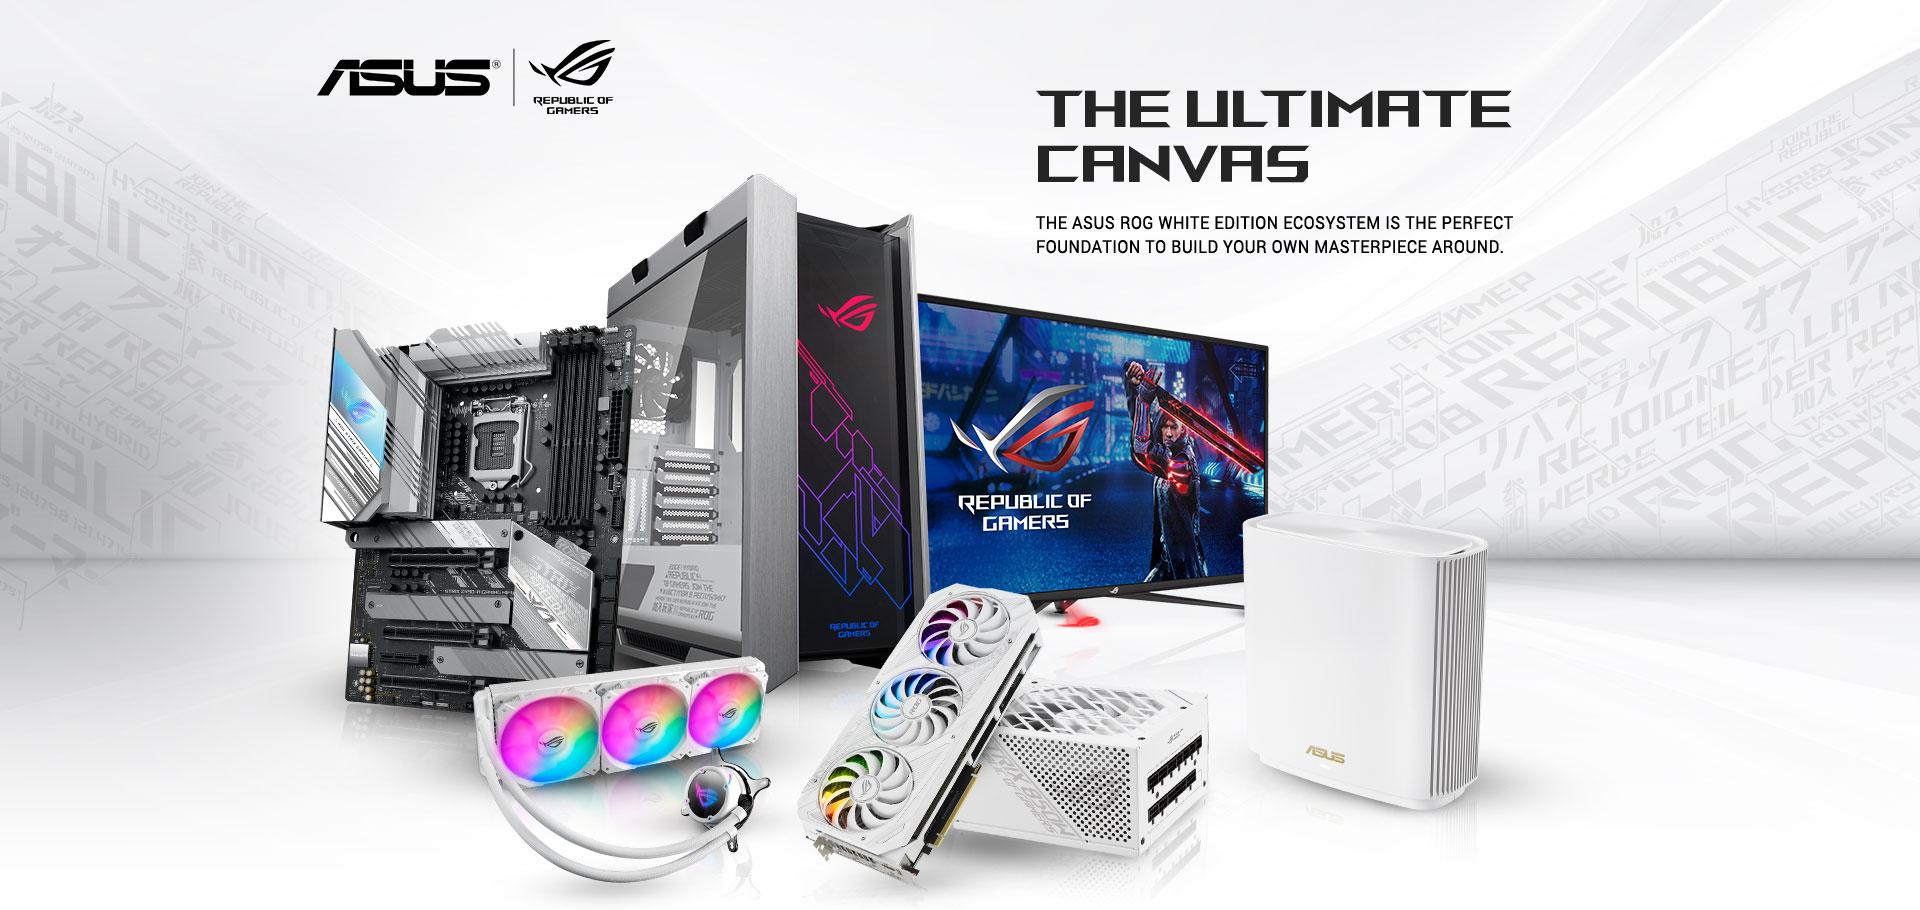 The ASUS ROG White Edition Ecosystem